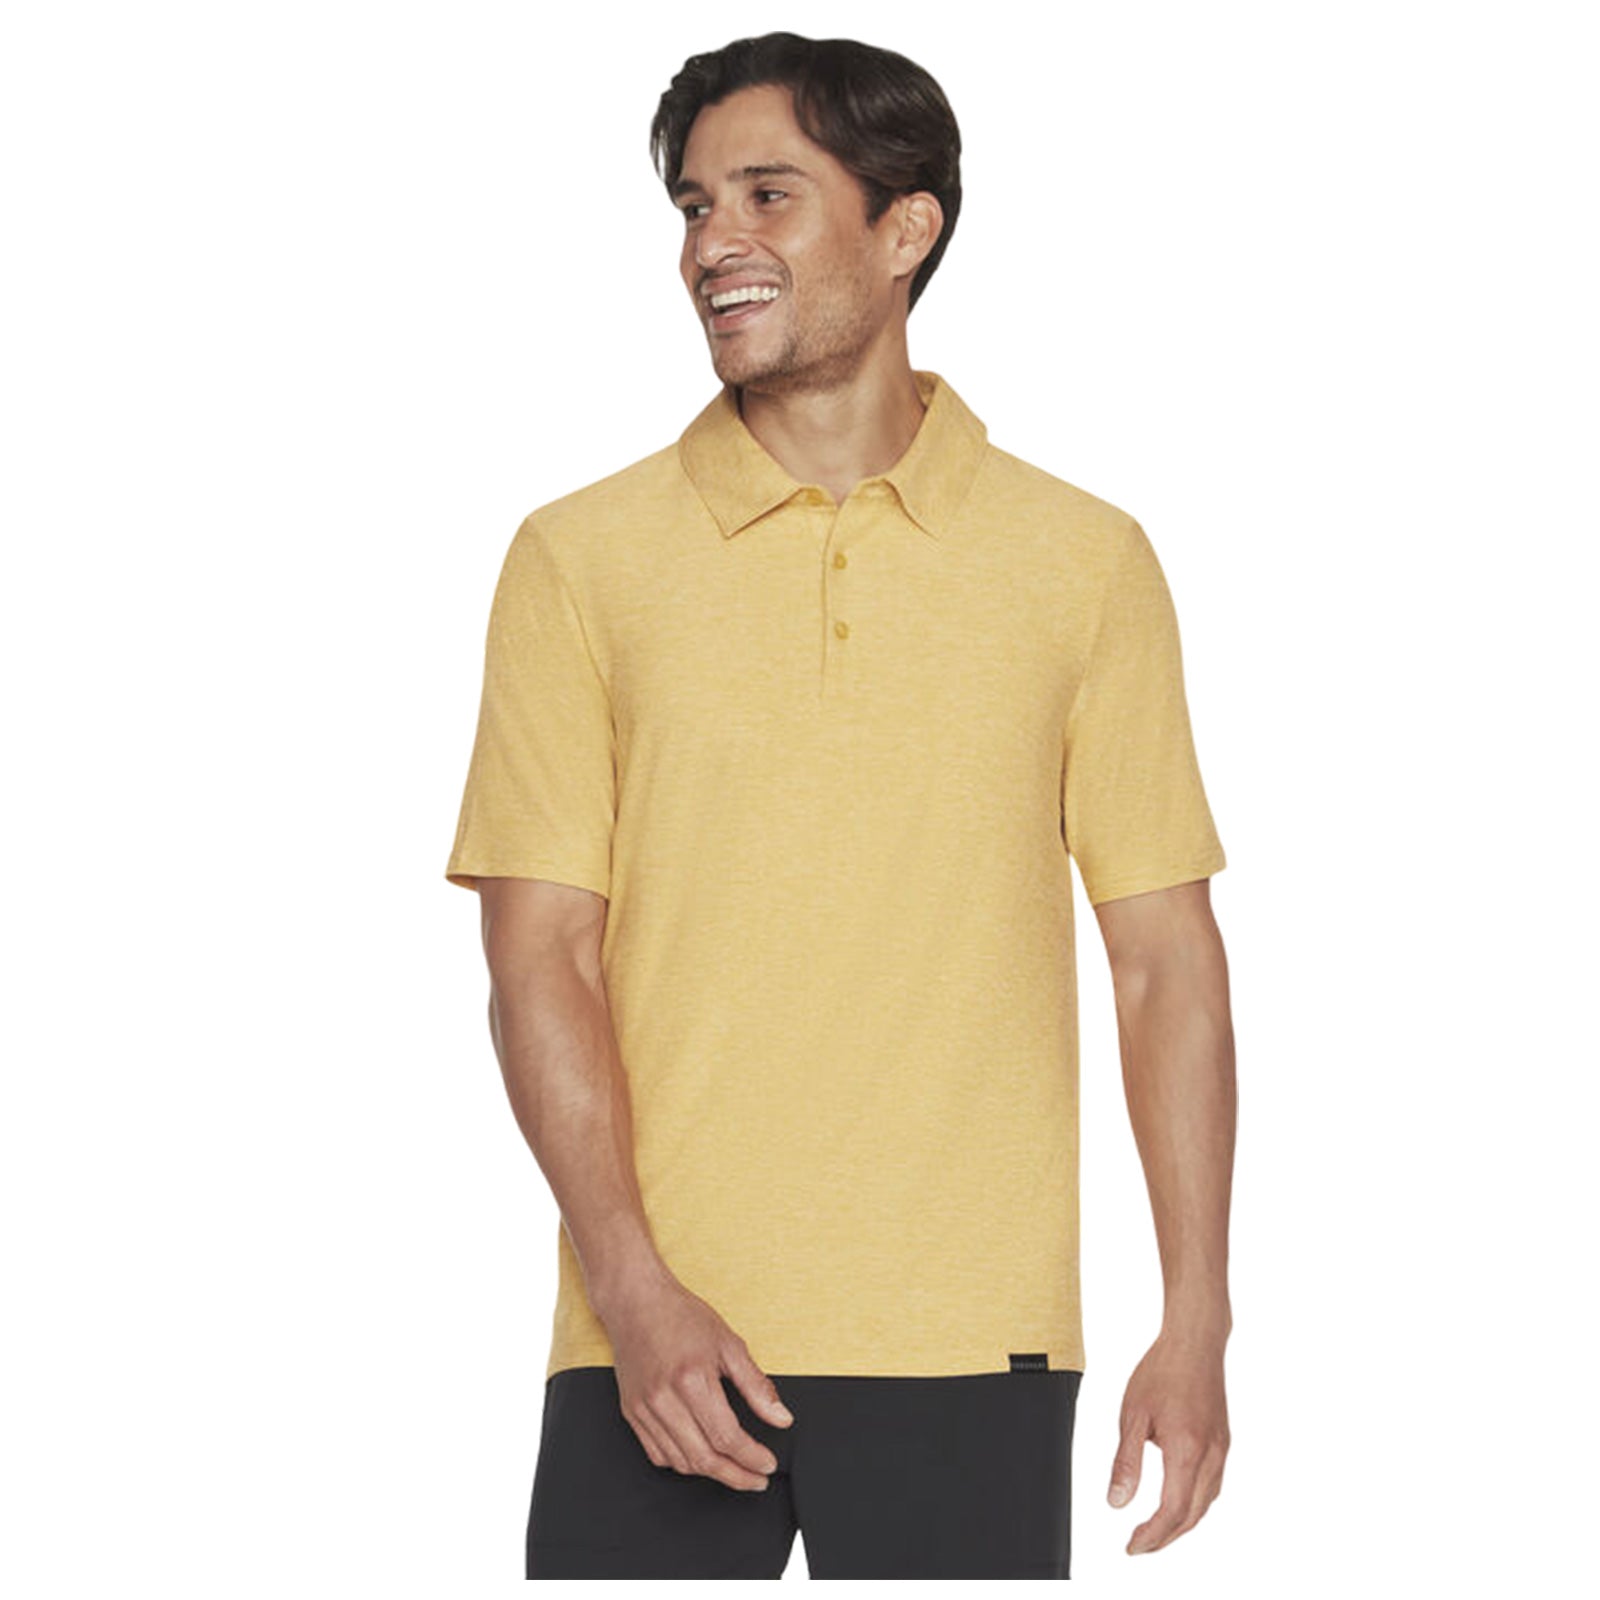 Skechers Mens All Day Polo Shirt 